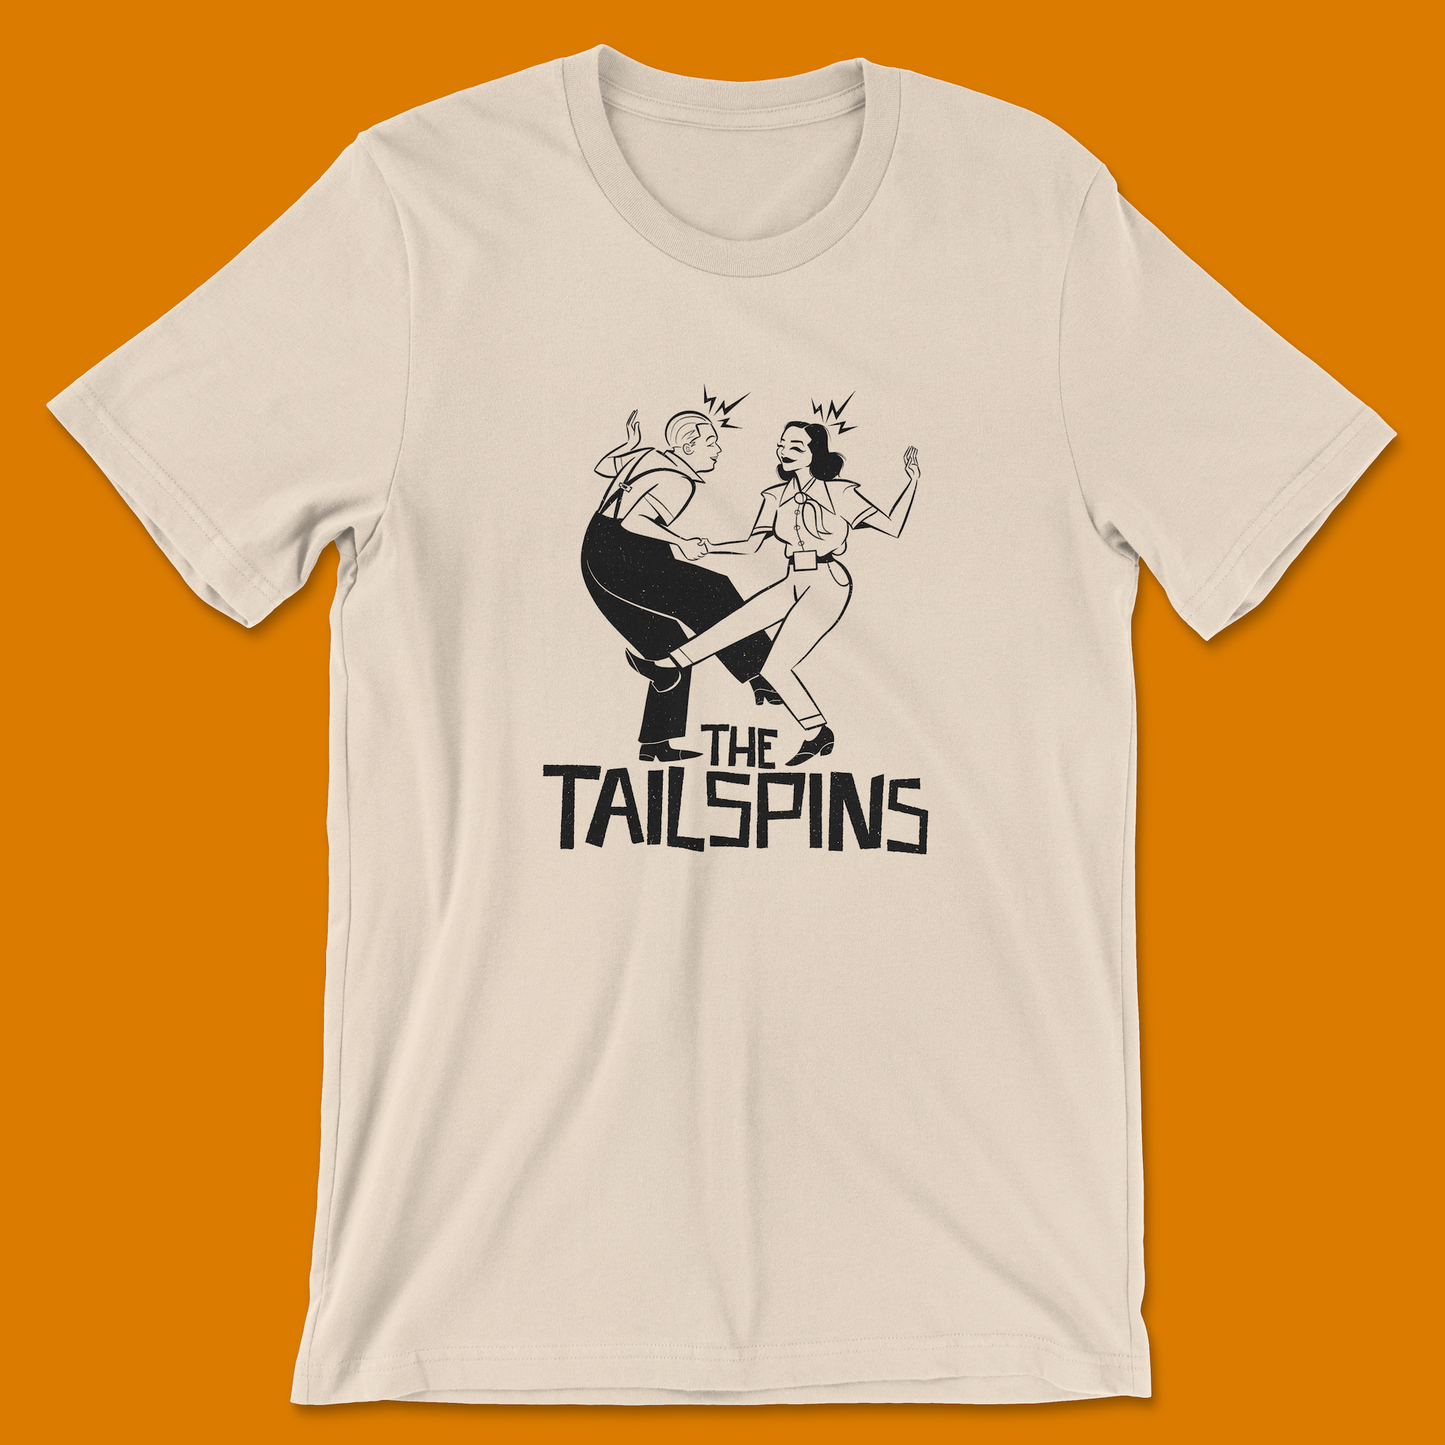 The Tailspins T